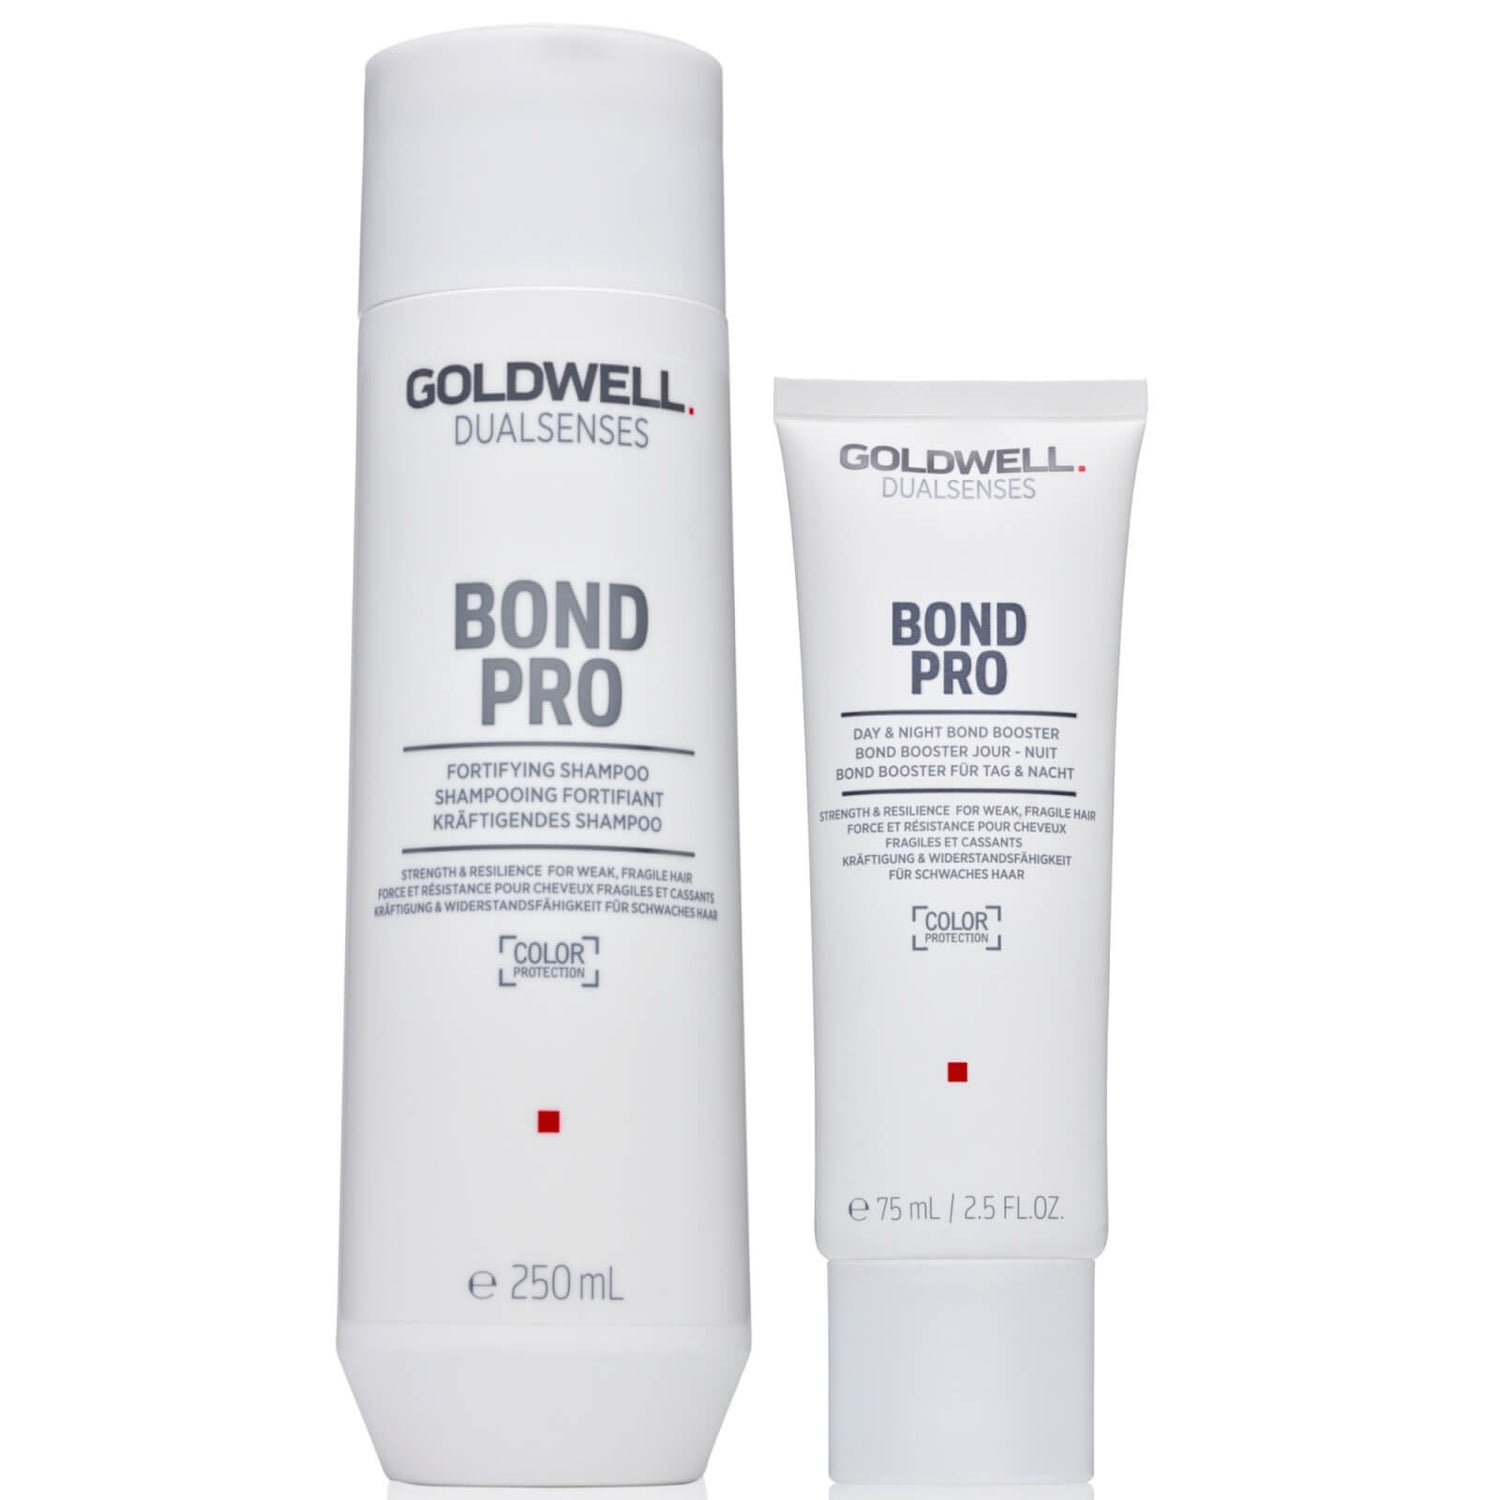 Goldwell Dualsenses Bondpro+ Day And Night Bond Booster Duo For Dry, Damaged Hair